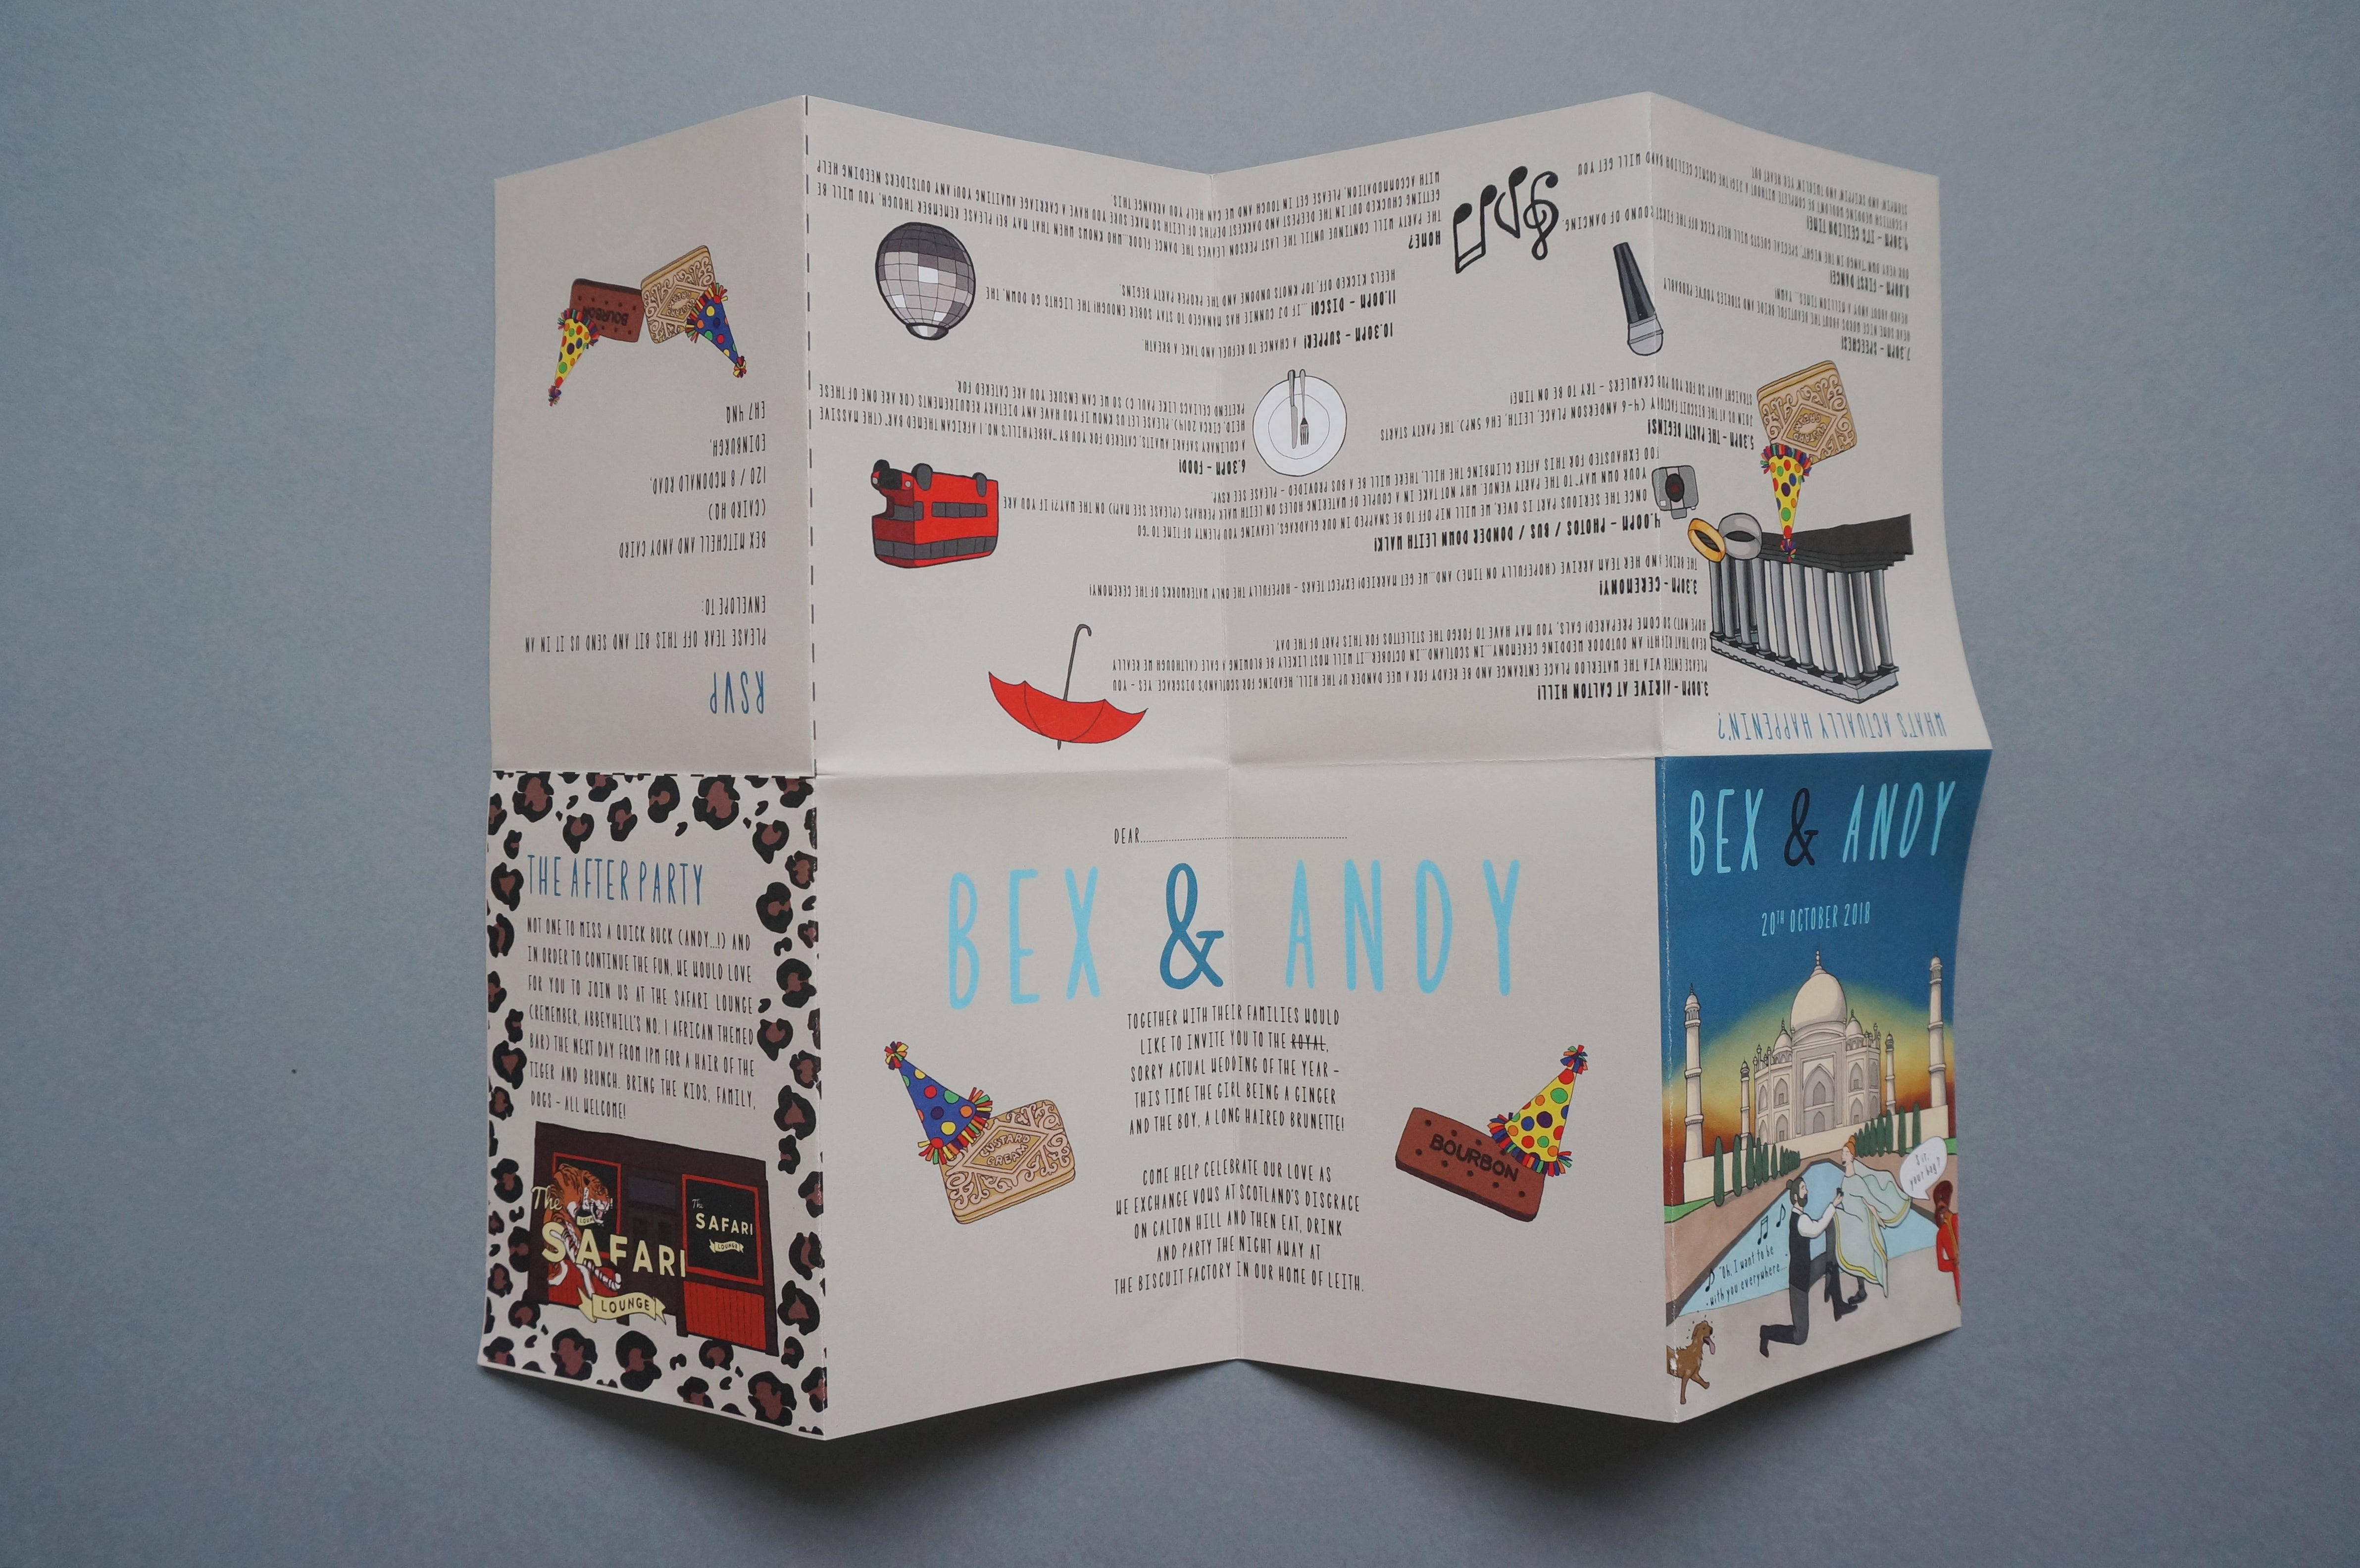 Bespoke Wedding invitation with additional wedding information for guests on a fold out design.